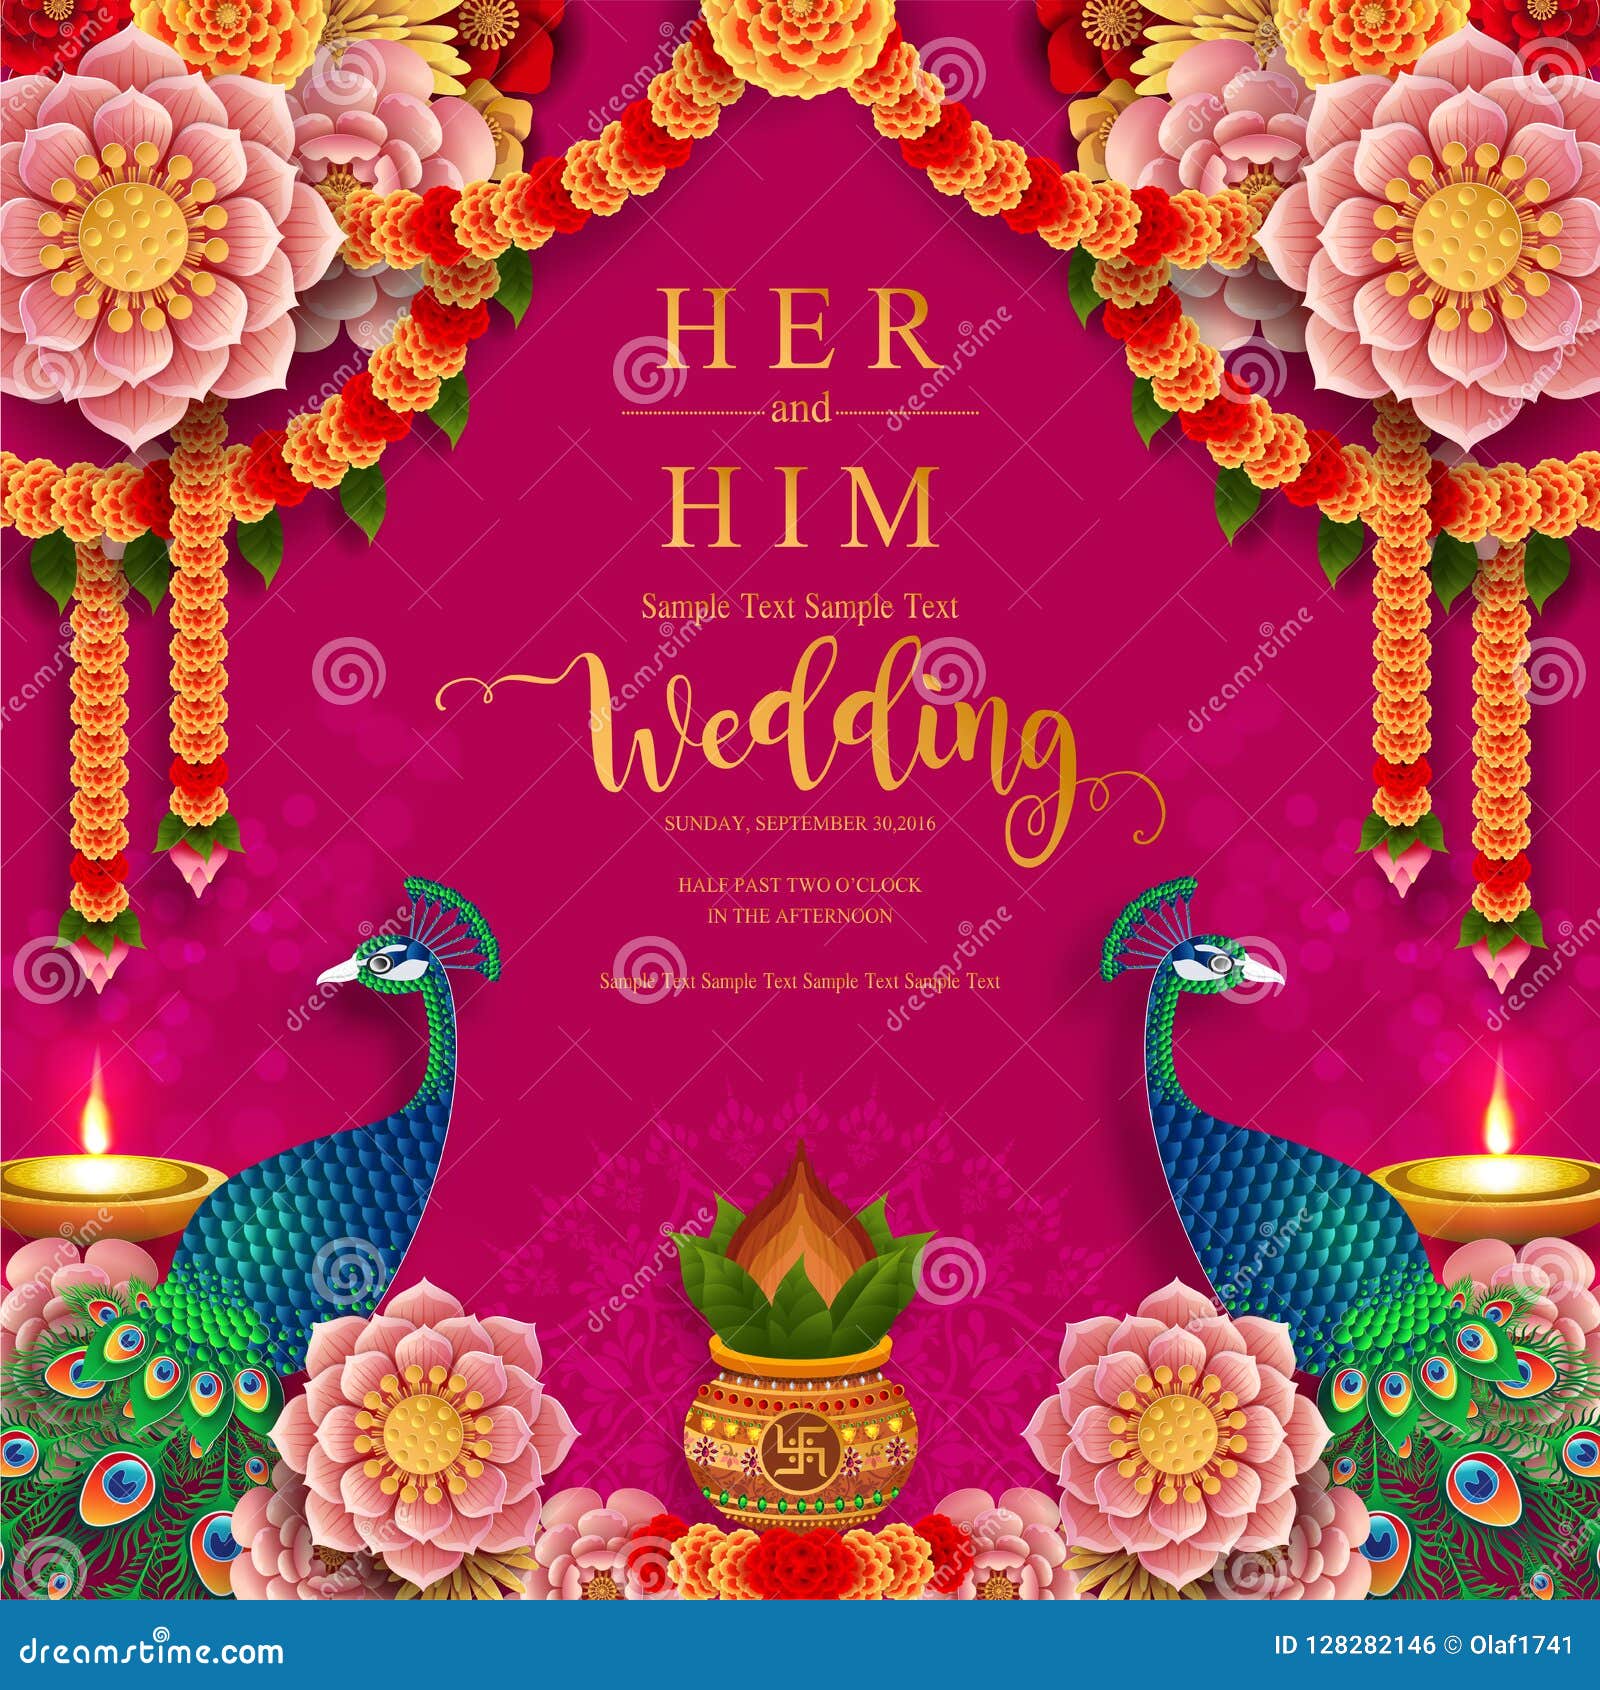 Indian Wedding Invitation Carddian Wedding Invitation Card Templates With Gold Patterned And Crystals On Paper Color Background Stock Vector Illustration Of Color Ceremony 128282146